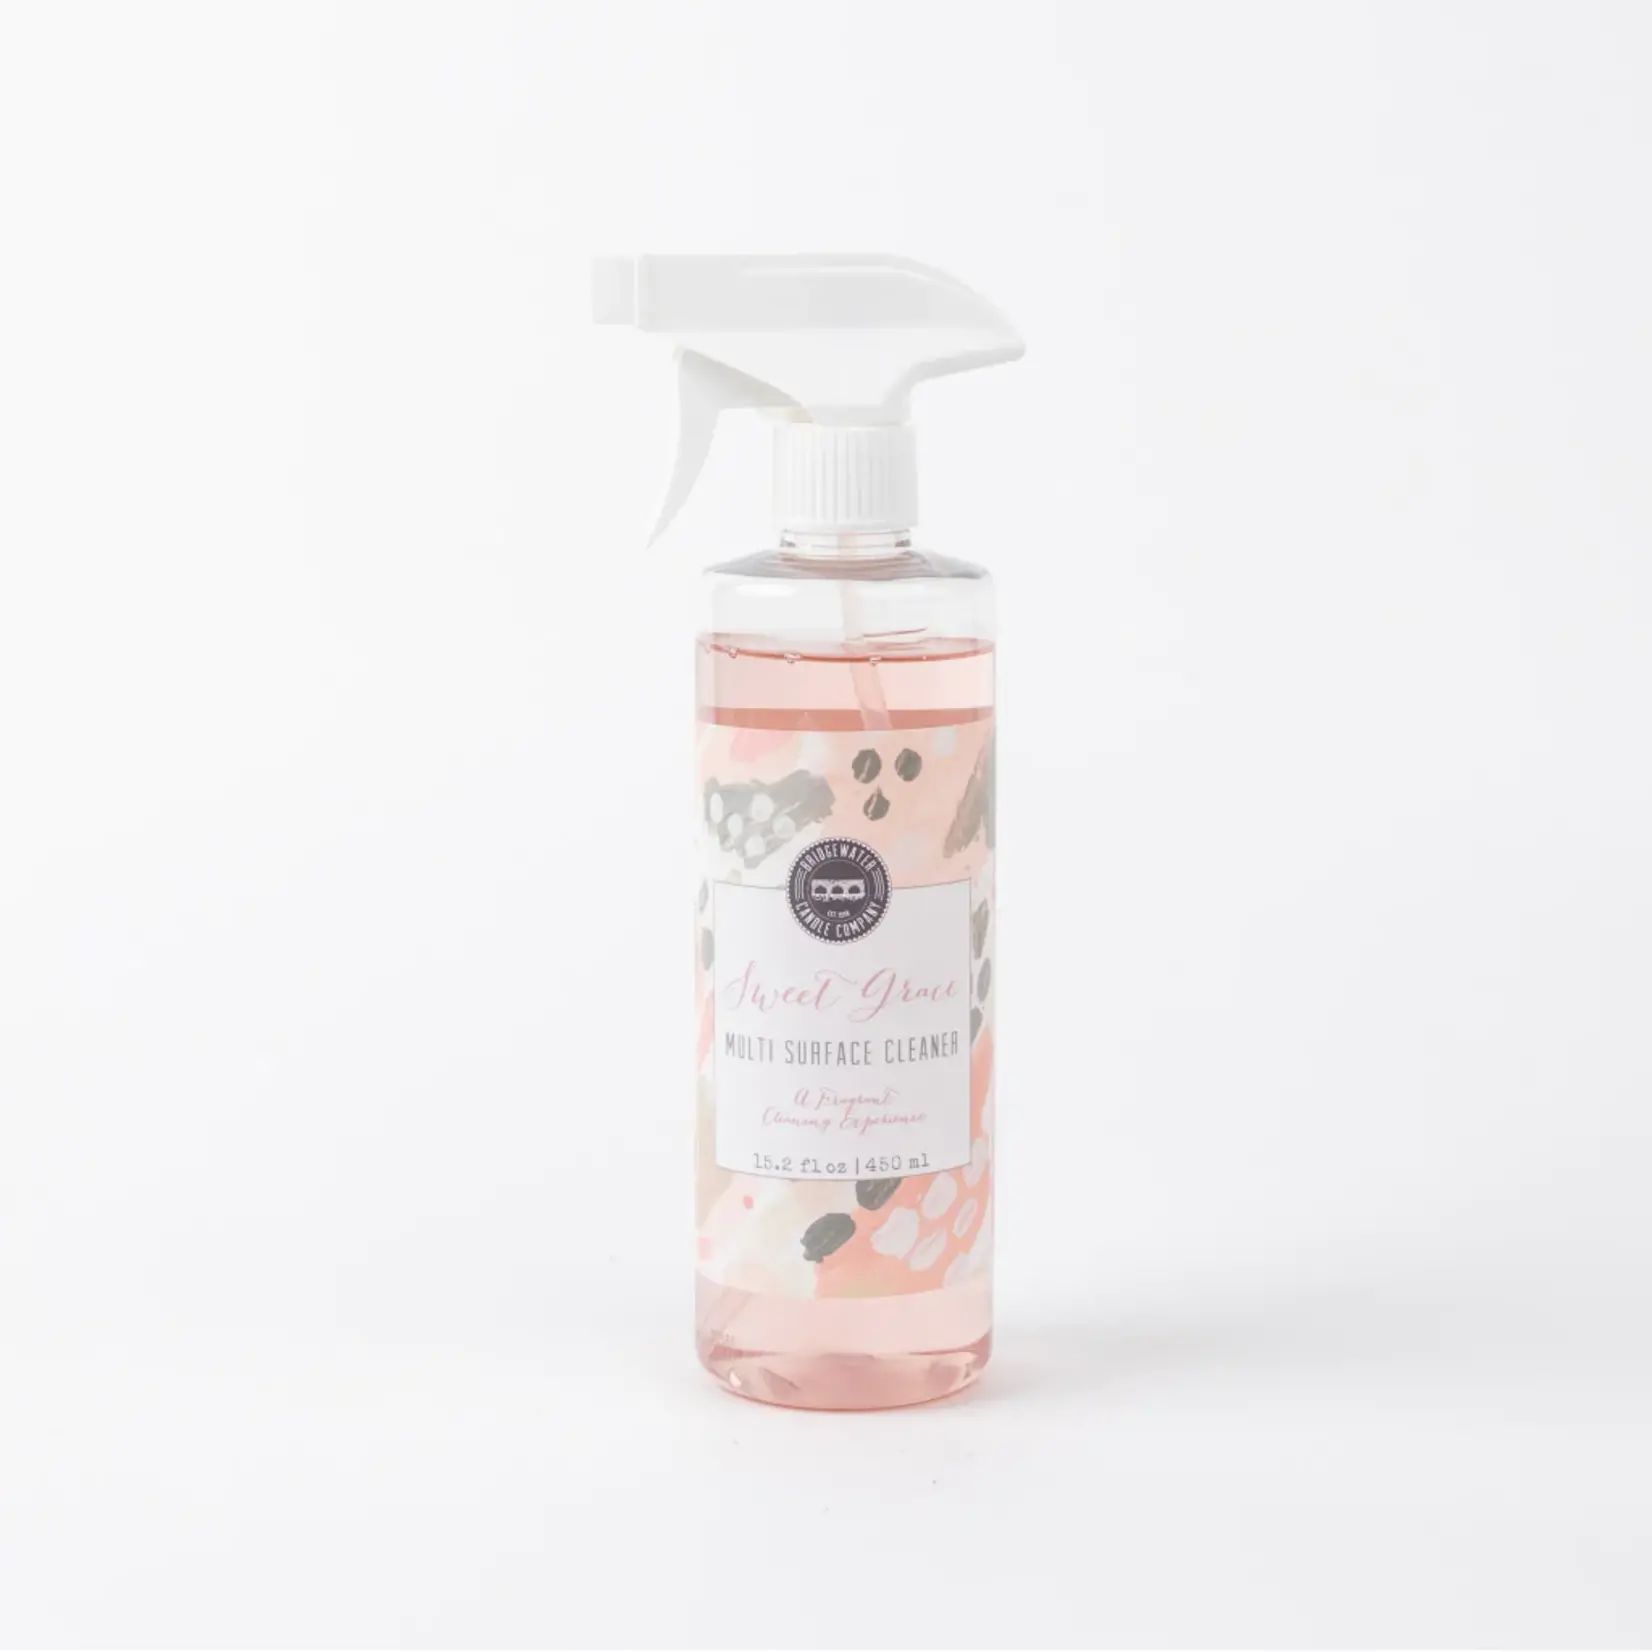 Sweet Grace MultiSurface Cleaner - Gracious Me!